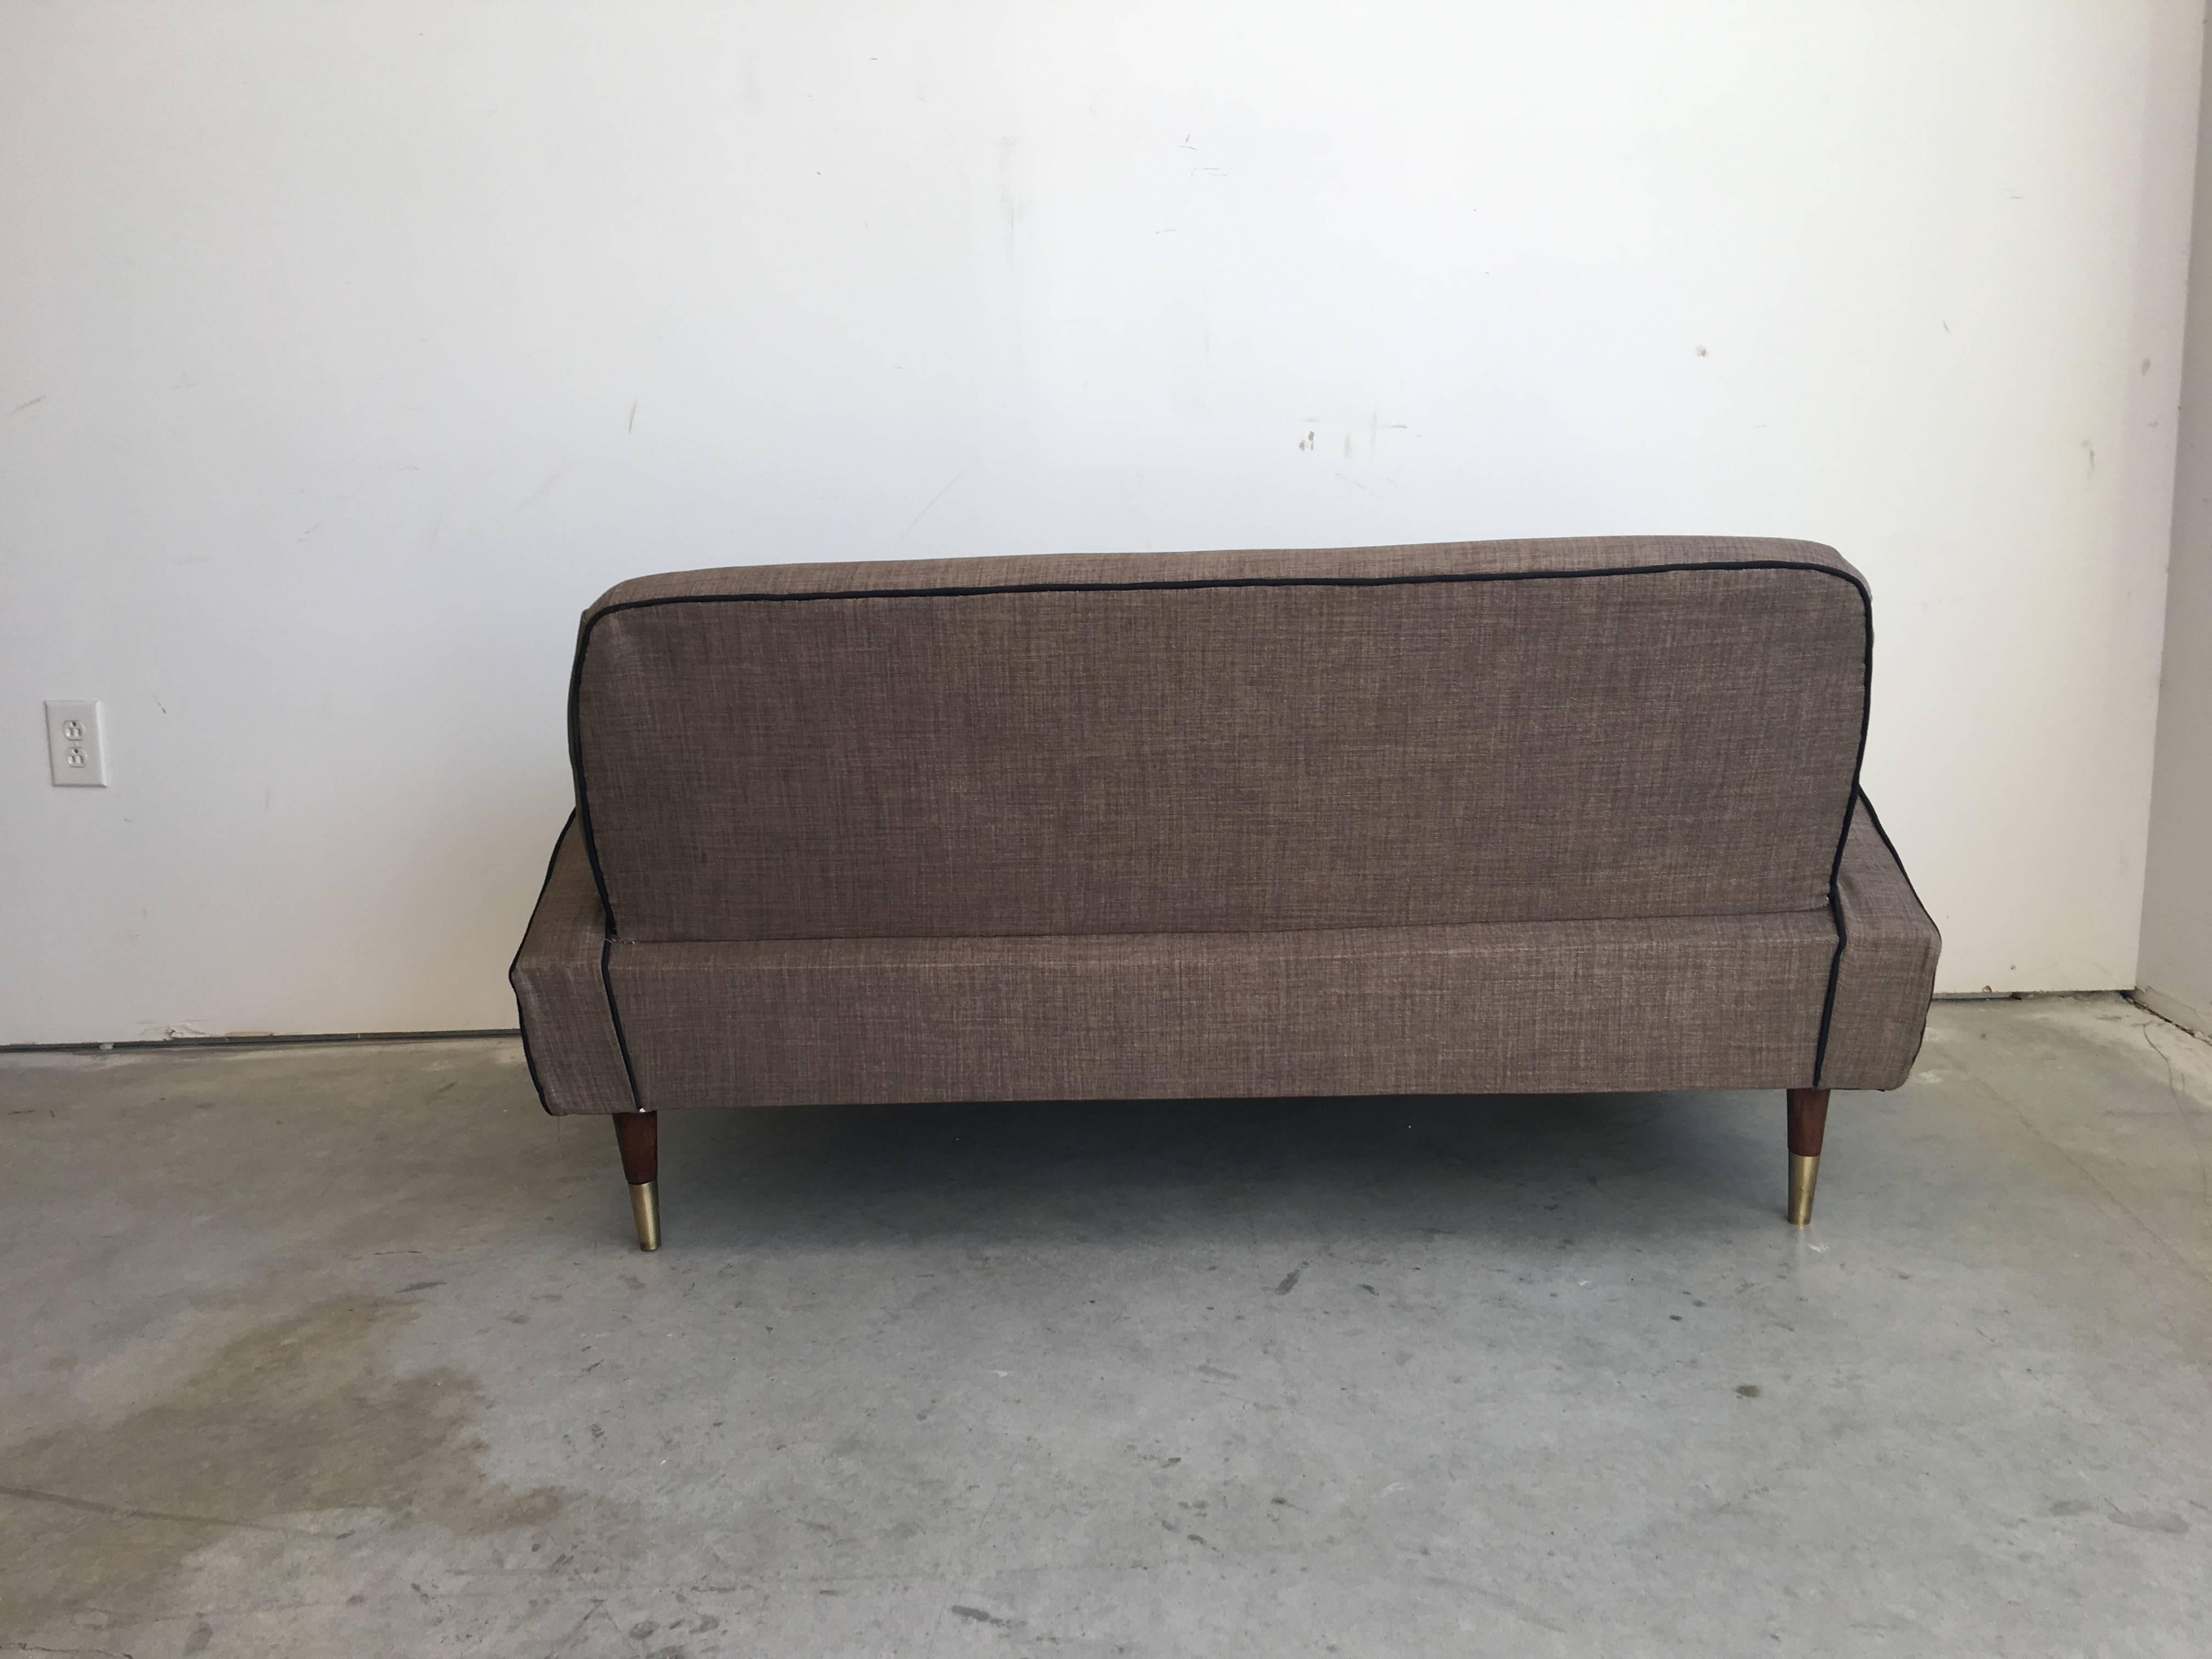 1940s Modern French Deco Floating Arm Sofa with Walnut and Brass Details 1